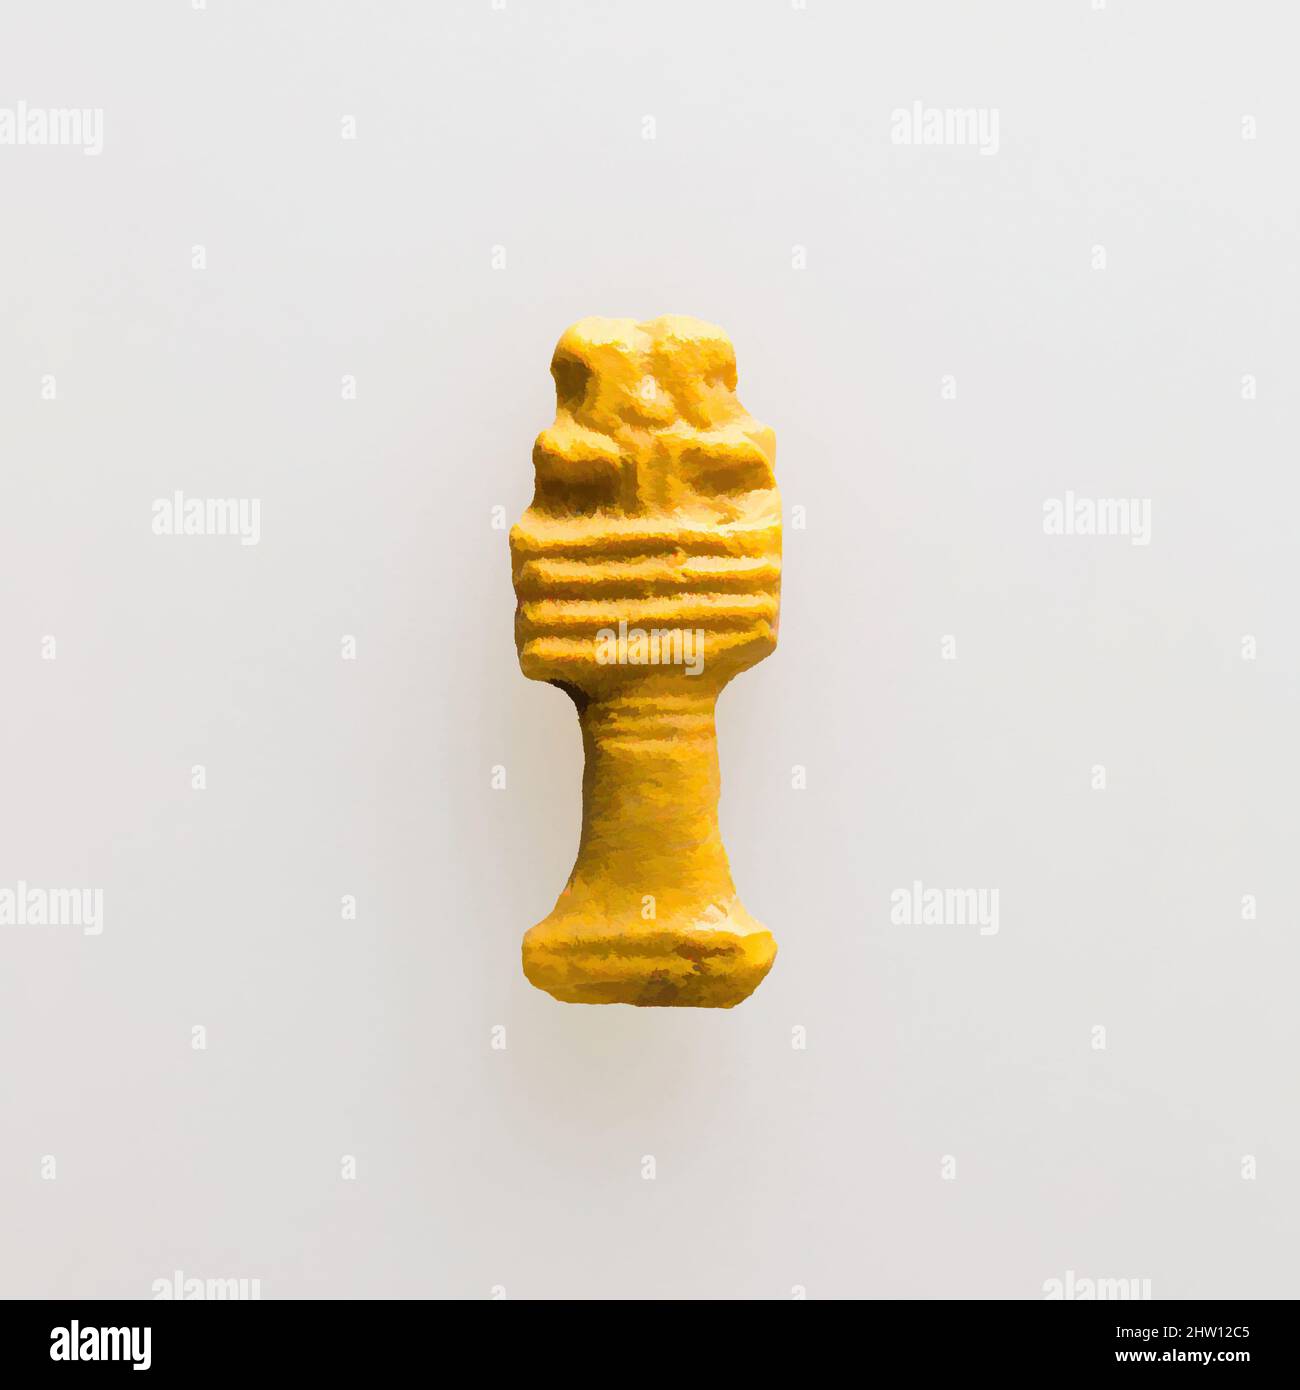 Art inspired by Djed pillar, Late Period–Ptolemaic Period, 525–30 BC, From Egypt, Yellow Glass, H. 3.4 × W. 1.3 cm (1 5/16 × 1/2 in.), Starting in the later Late Period and continuing through the Ptolemaic Period, glass a type of glass amulet cast by pressing the glass into a shallow, Classic works modernized by Artotop with a splash of modernity. Shapes, color and value, eye-catching visual impact on art. Emotions through freedom of artworks in a contemporary way. A timeless message pursuing a wildly creative new direction. Artists turning to the digital medium and creating the Artotop NFT Stock Photo